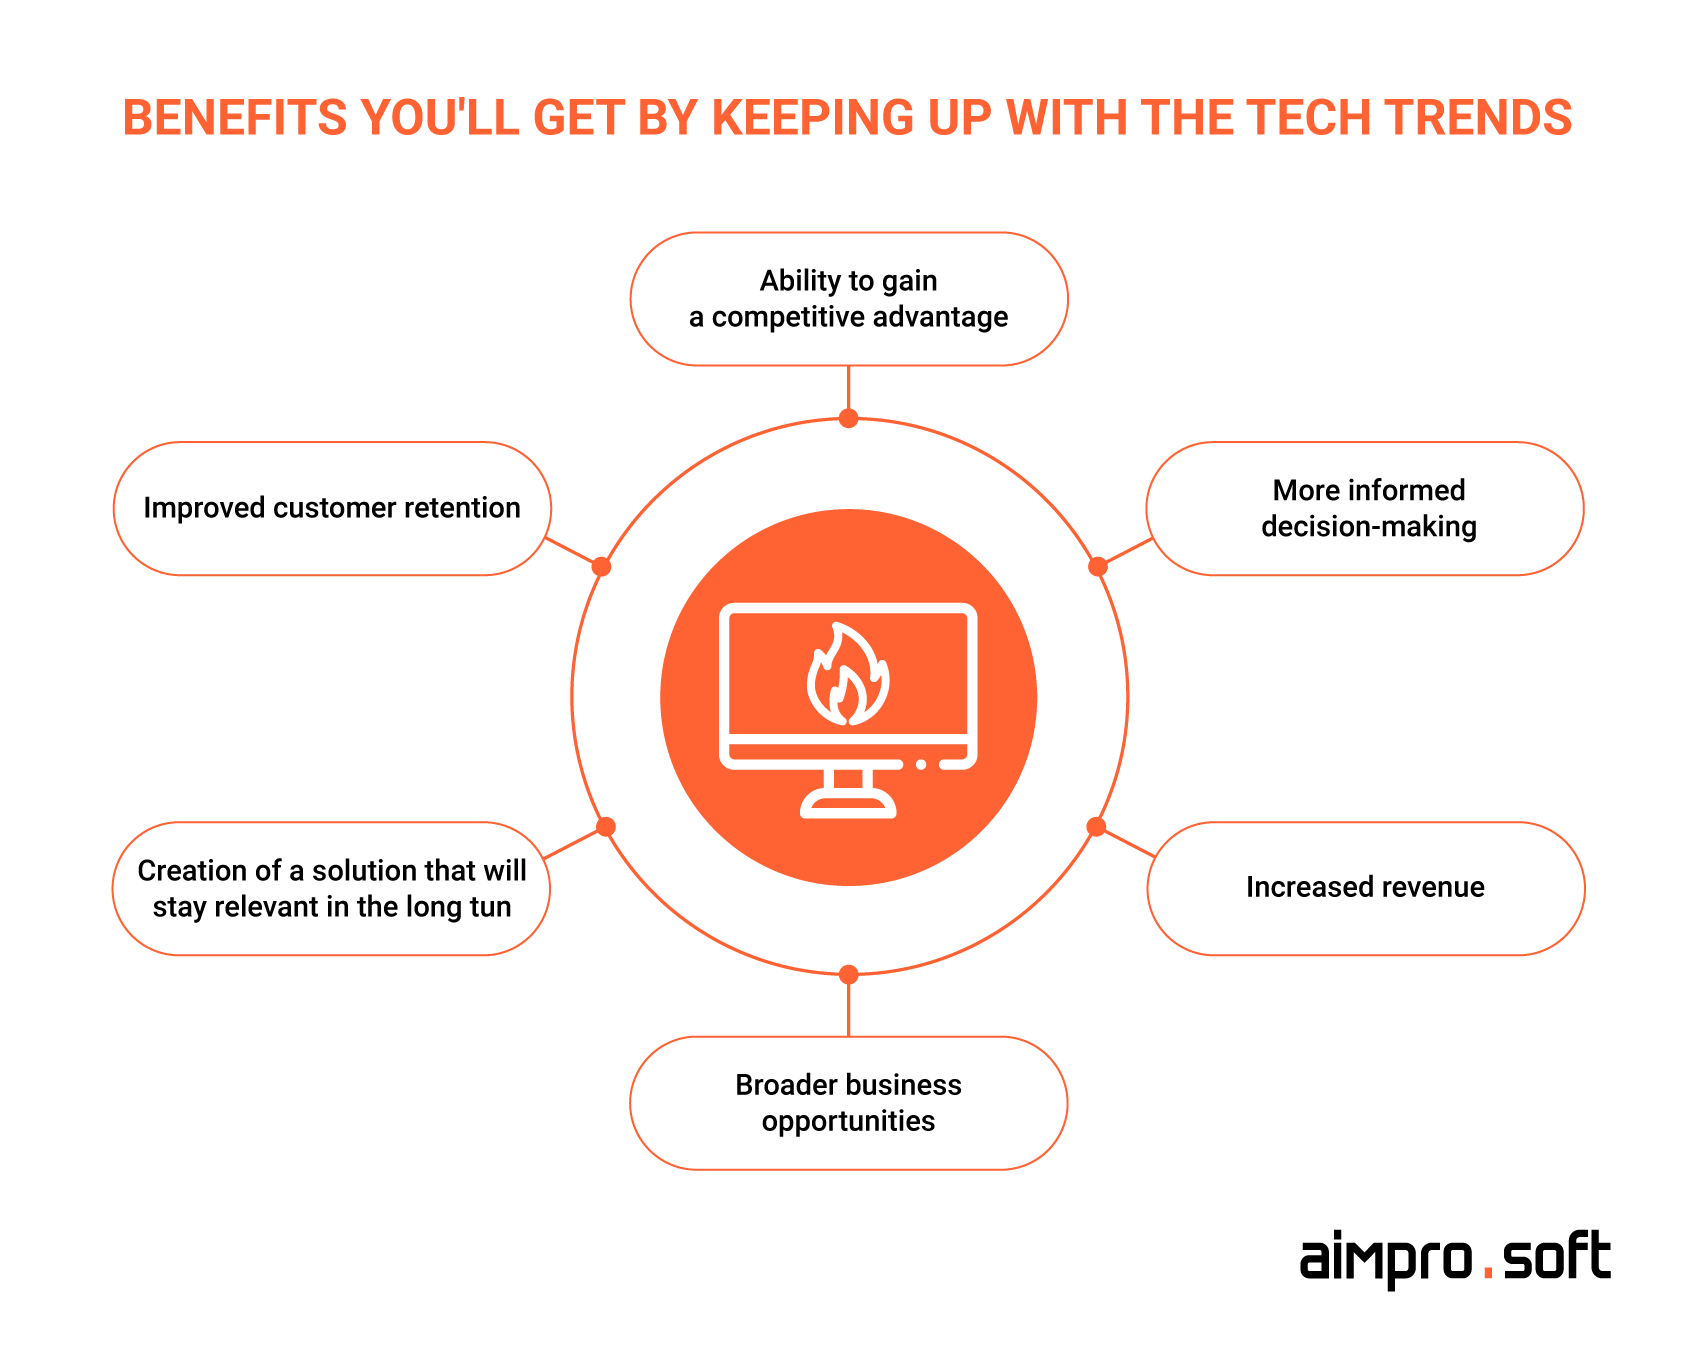 Benefits you'll get by keeping up with the tech trends